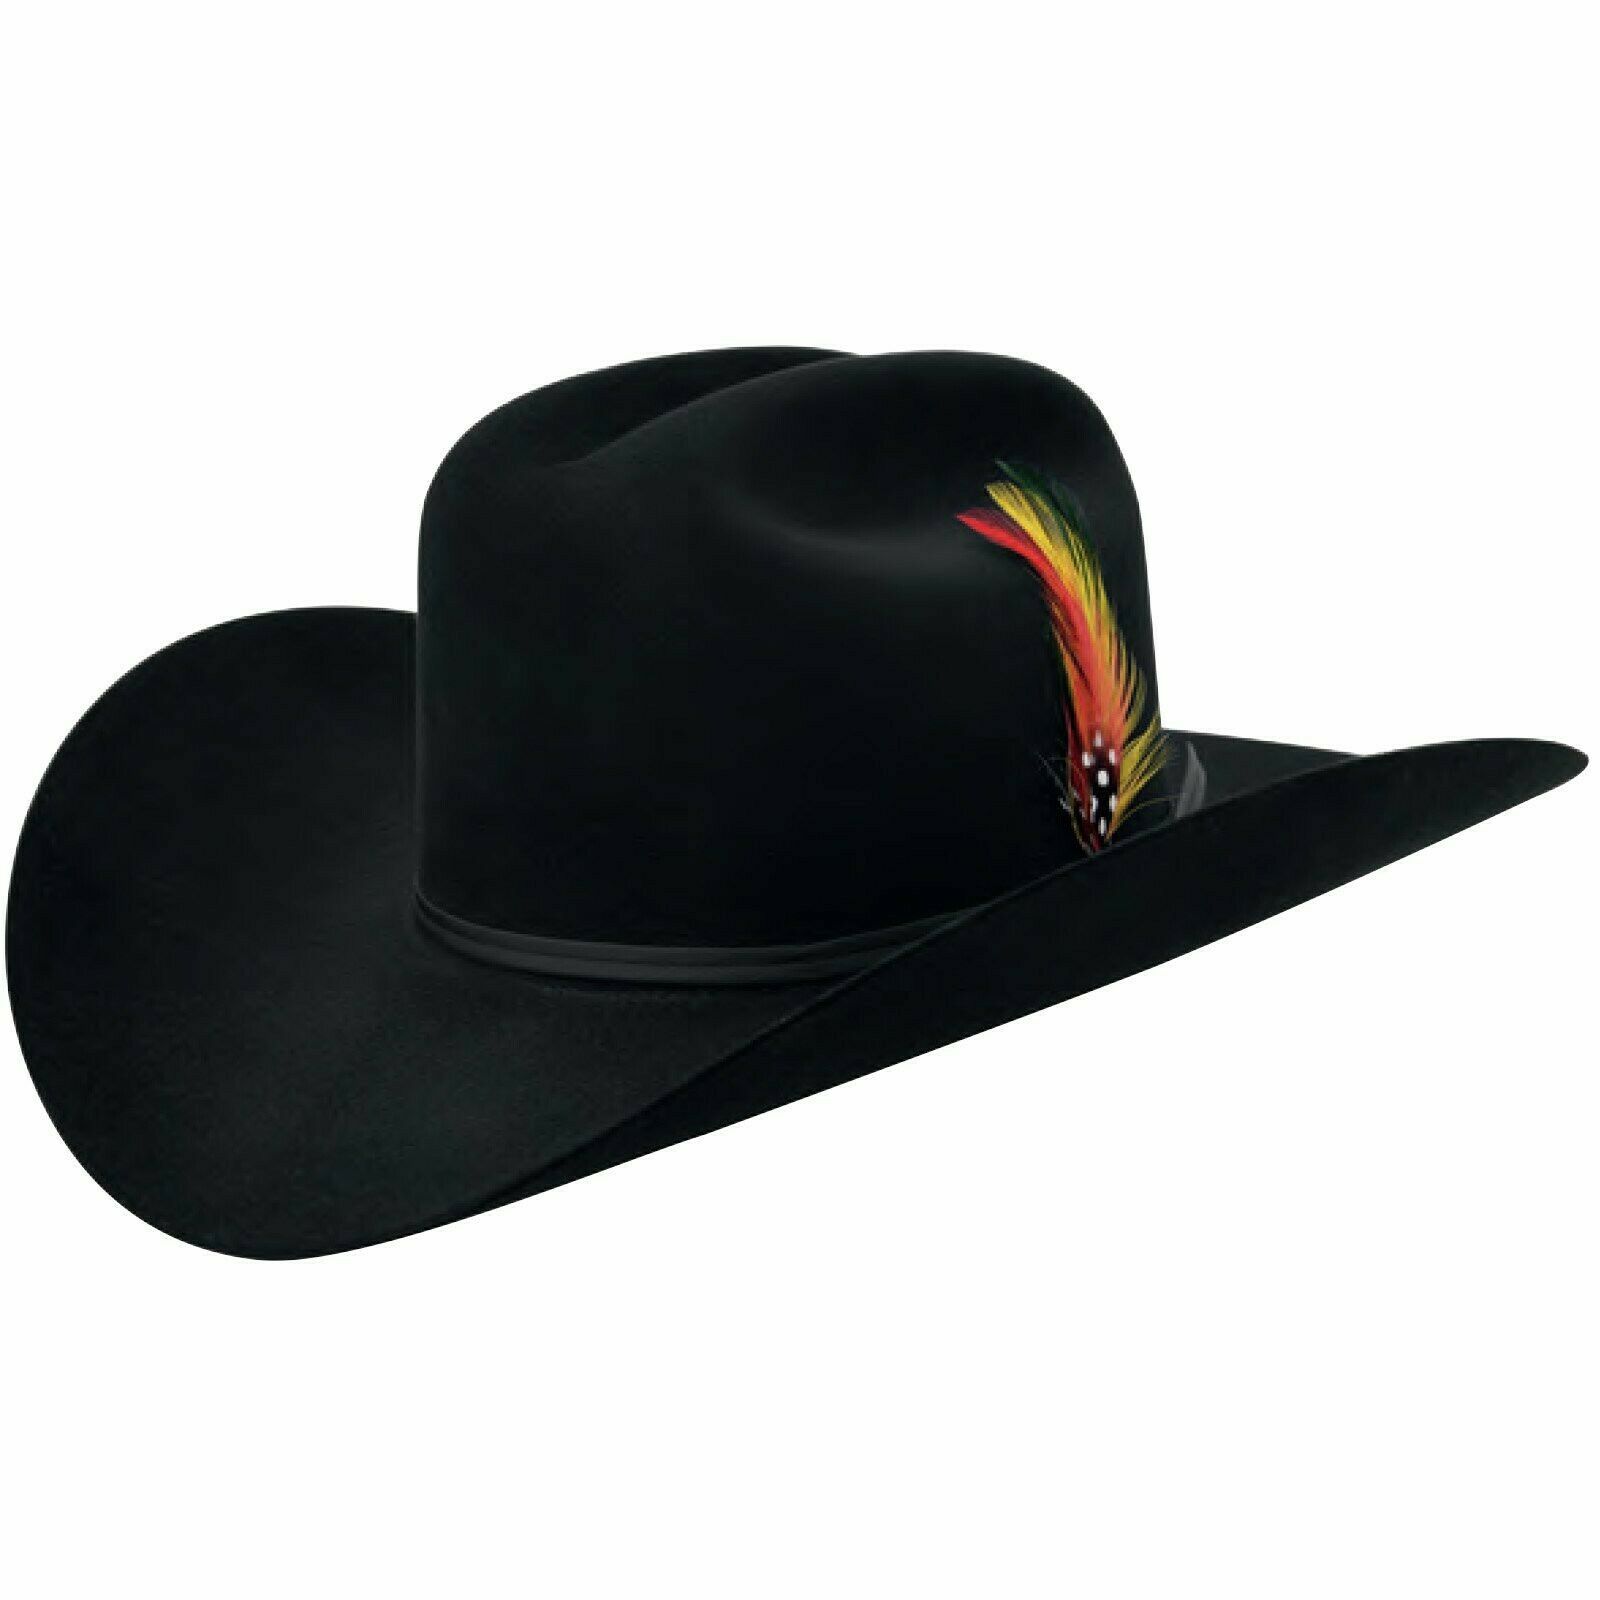 Cowboy Hat Feather, Western Hat Feather, Fedora Hat Feather, Hat